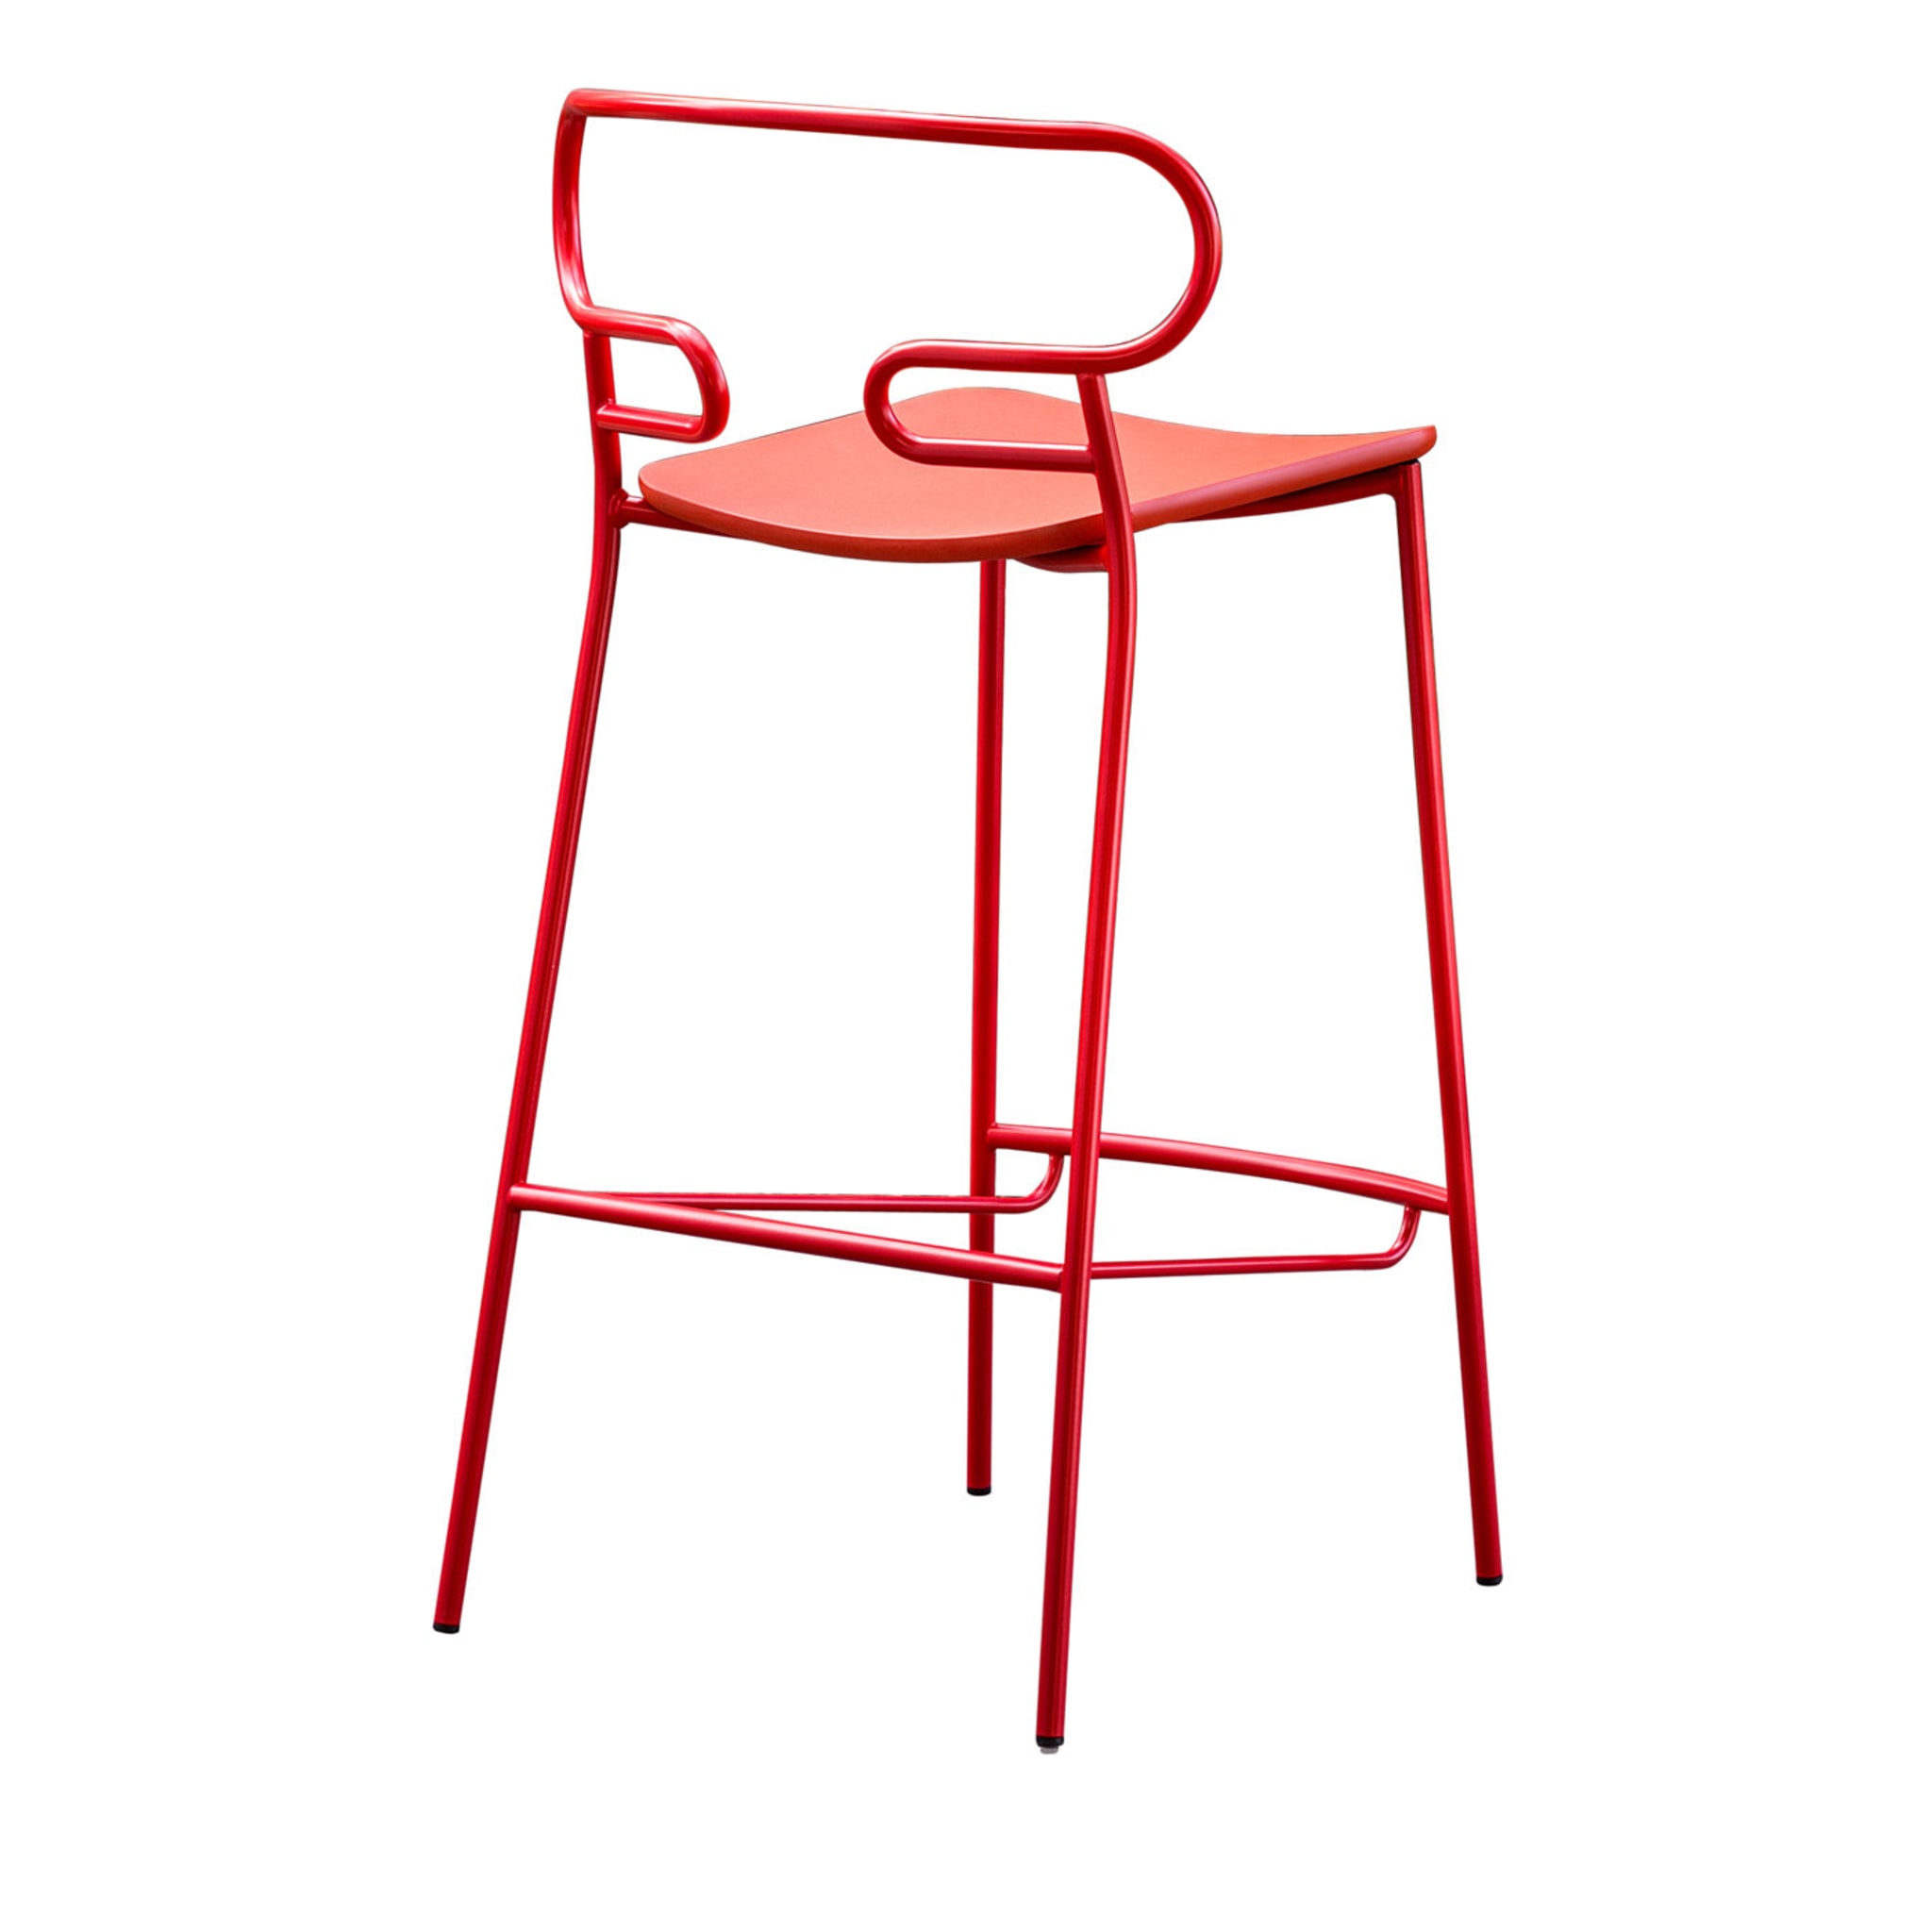 Genoa Red Bar Stool By Cesare Ehr - Alternative view 3